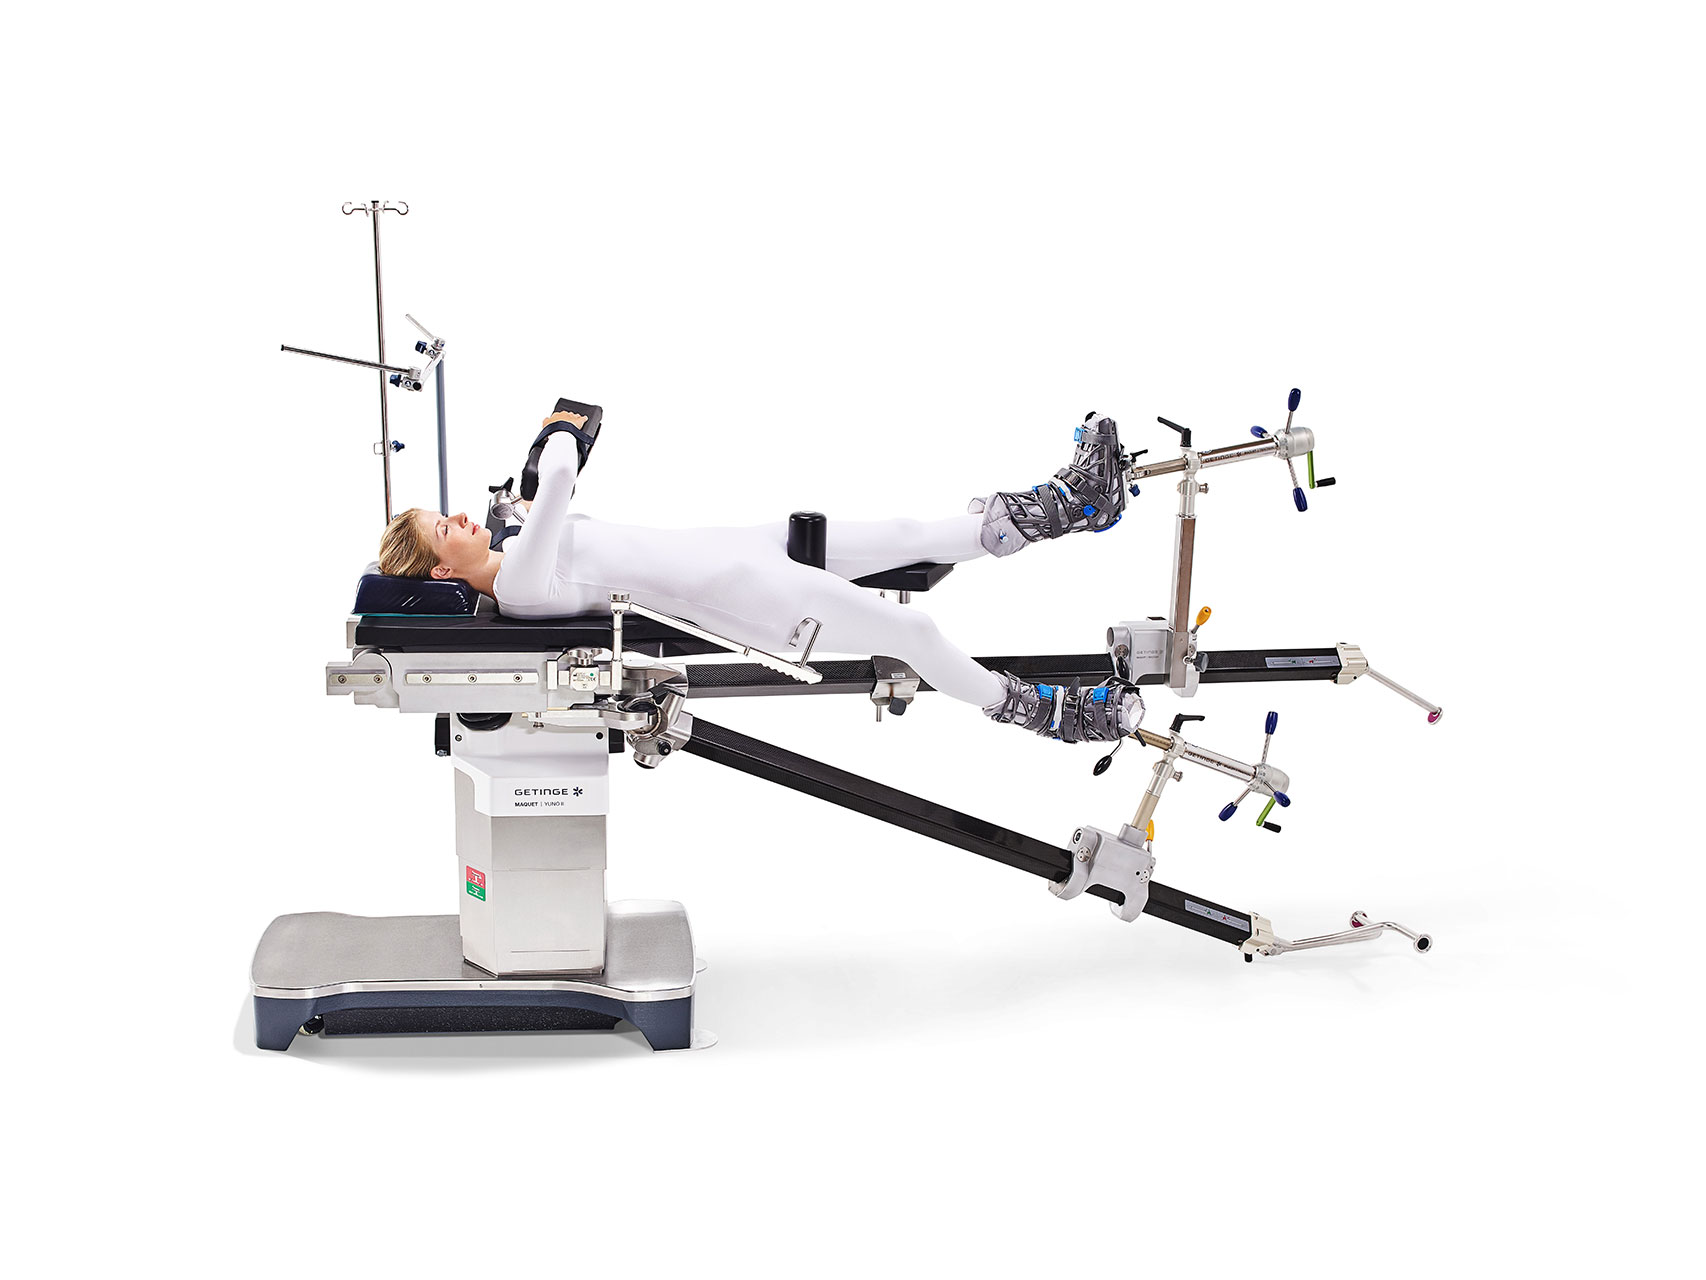 The direct anterior approach requires a complex course of leg movements. The traction bar with ball joint mimics the smooth multidirectional movement of the hip itself. This Maquet Yuno II surgical table bar is easy to operate, flexible to position, and securely locked to prevent overextension and keep the patient safe. 